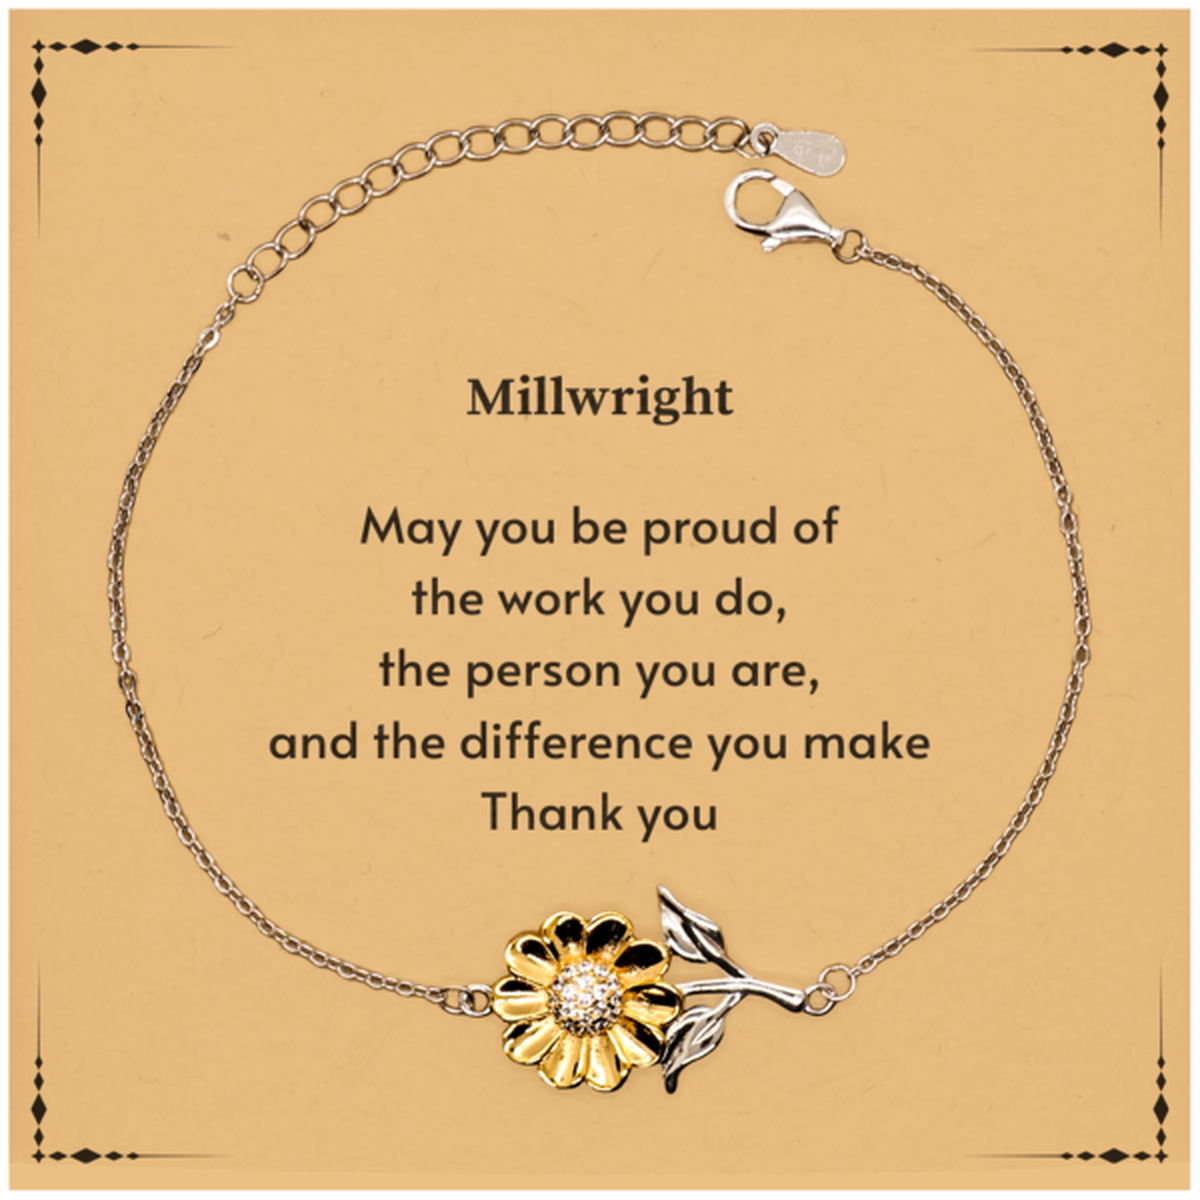 Heartwarming Sunflower Bracelet Retirement Coworkers Gifts for Millwright, Millwright May You be proud of the work you do, the person you are Gifts for Boss Men Women Friends